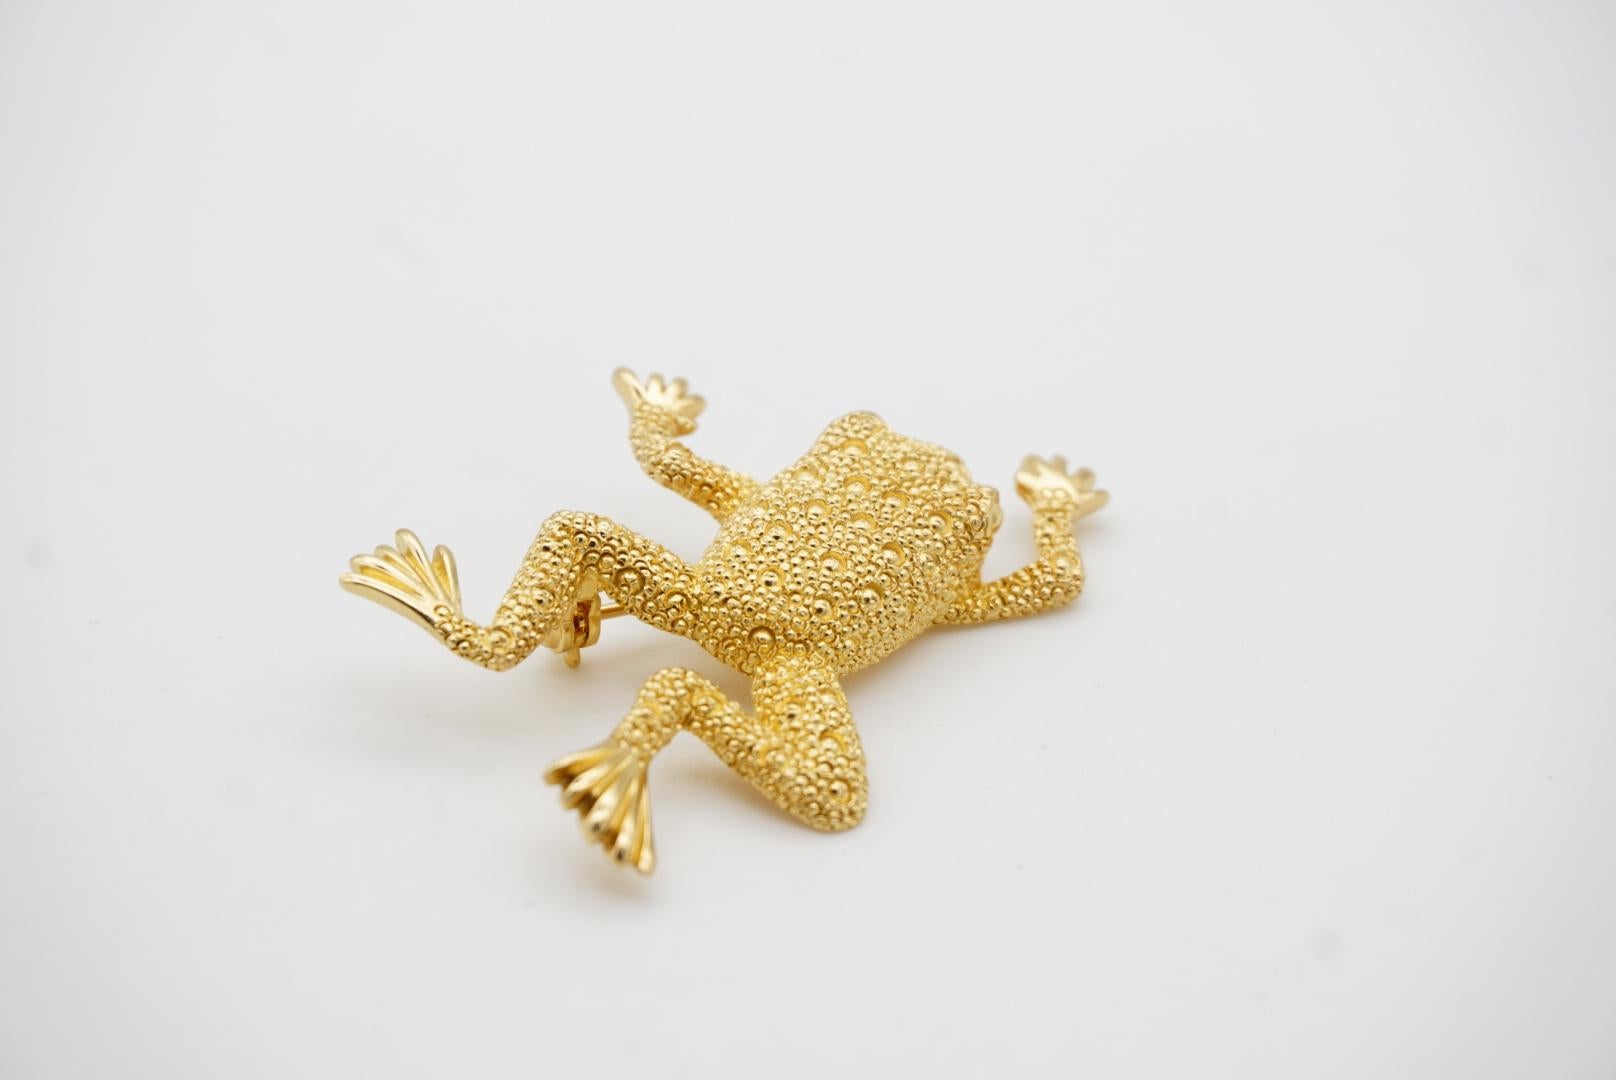 Christian Dior 1980s Vintage Textured Vivid Cute Jumping Swimming Frog Brooch In Excellent Condition For Sale In Wokingham, England